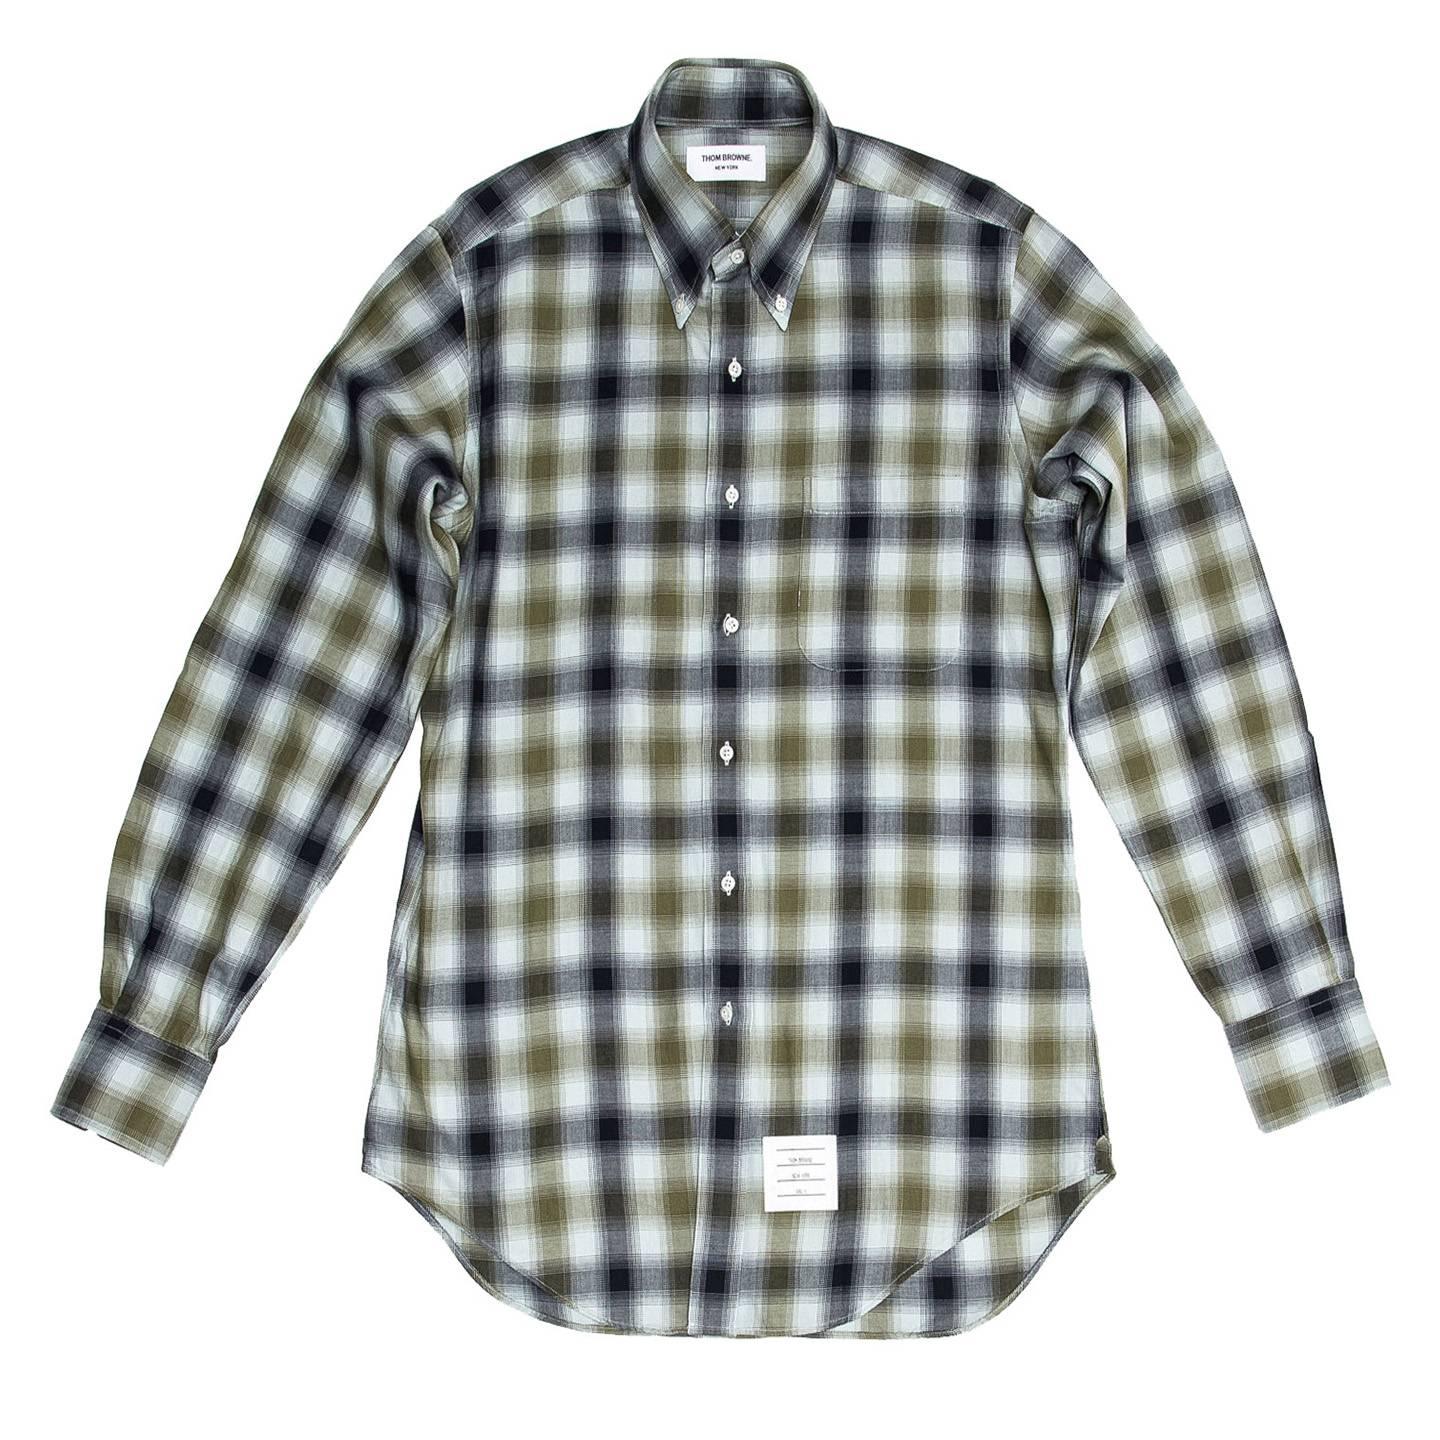 Thom Browne navy blue, baby blue and pine green plaid cotton flannel shirt with button down collar, white mother-of-pearl buttons and a patch pocket at bust. Made for Man. Made in U.S.A.

Size  4

Condition  Excellent: never worn